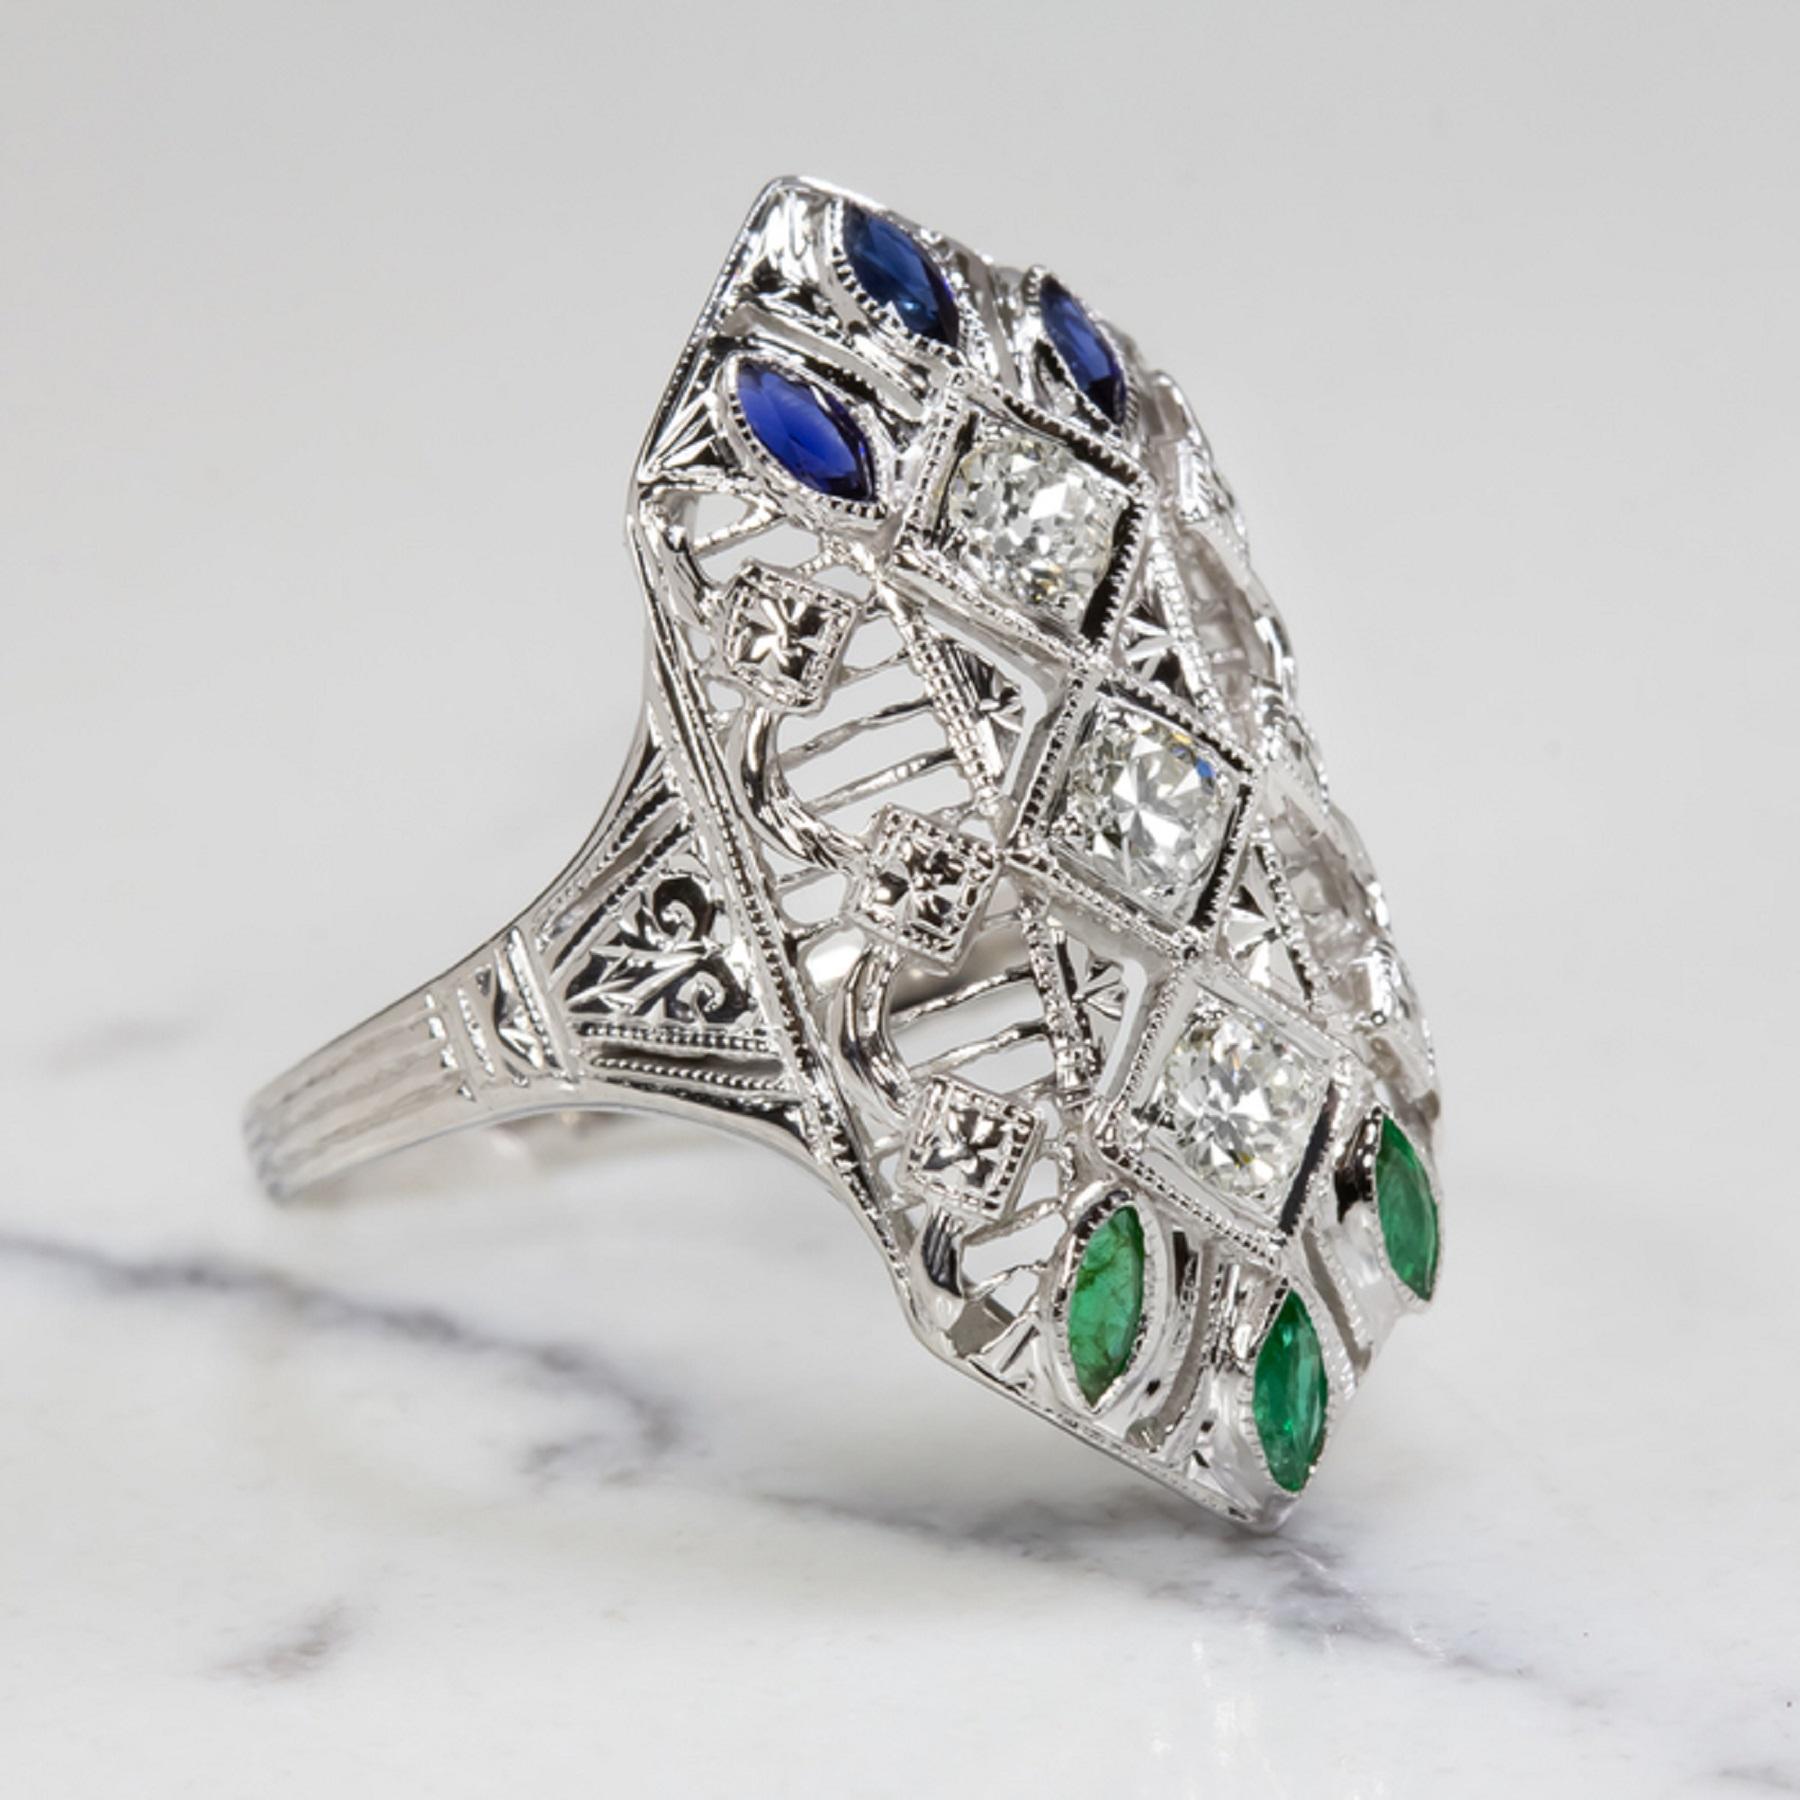 This gorgeous diamond, emerald, and sapphire studded cocktail ring is elegantly designed with an artful structure and was masterfully crafted by hand a lifetime in the past during the illustrious Art Deco era. 

The ring features a trio of old